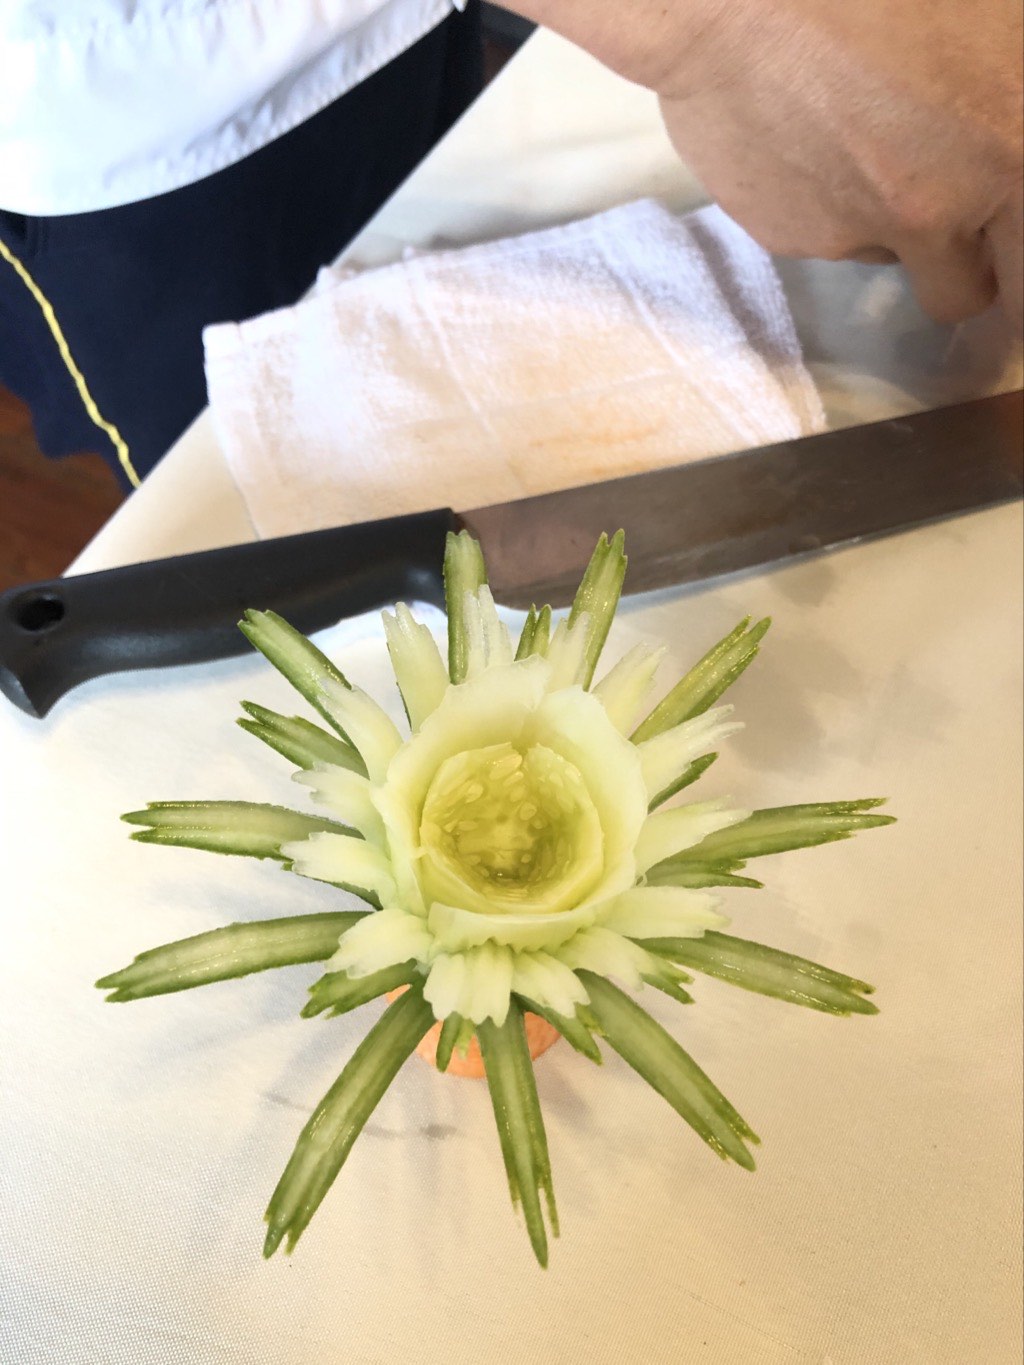 Finished Cucumber Flower